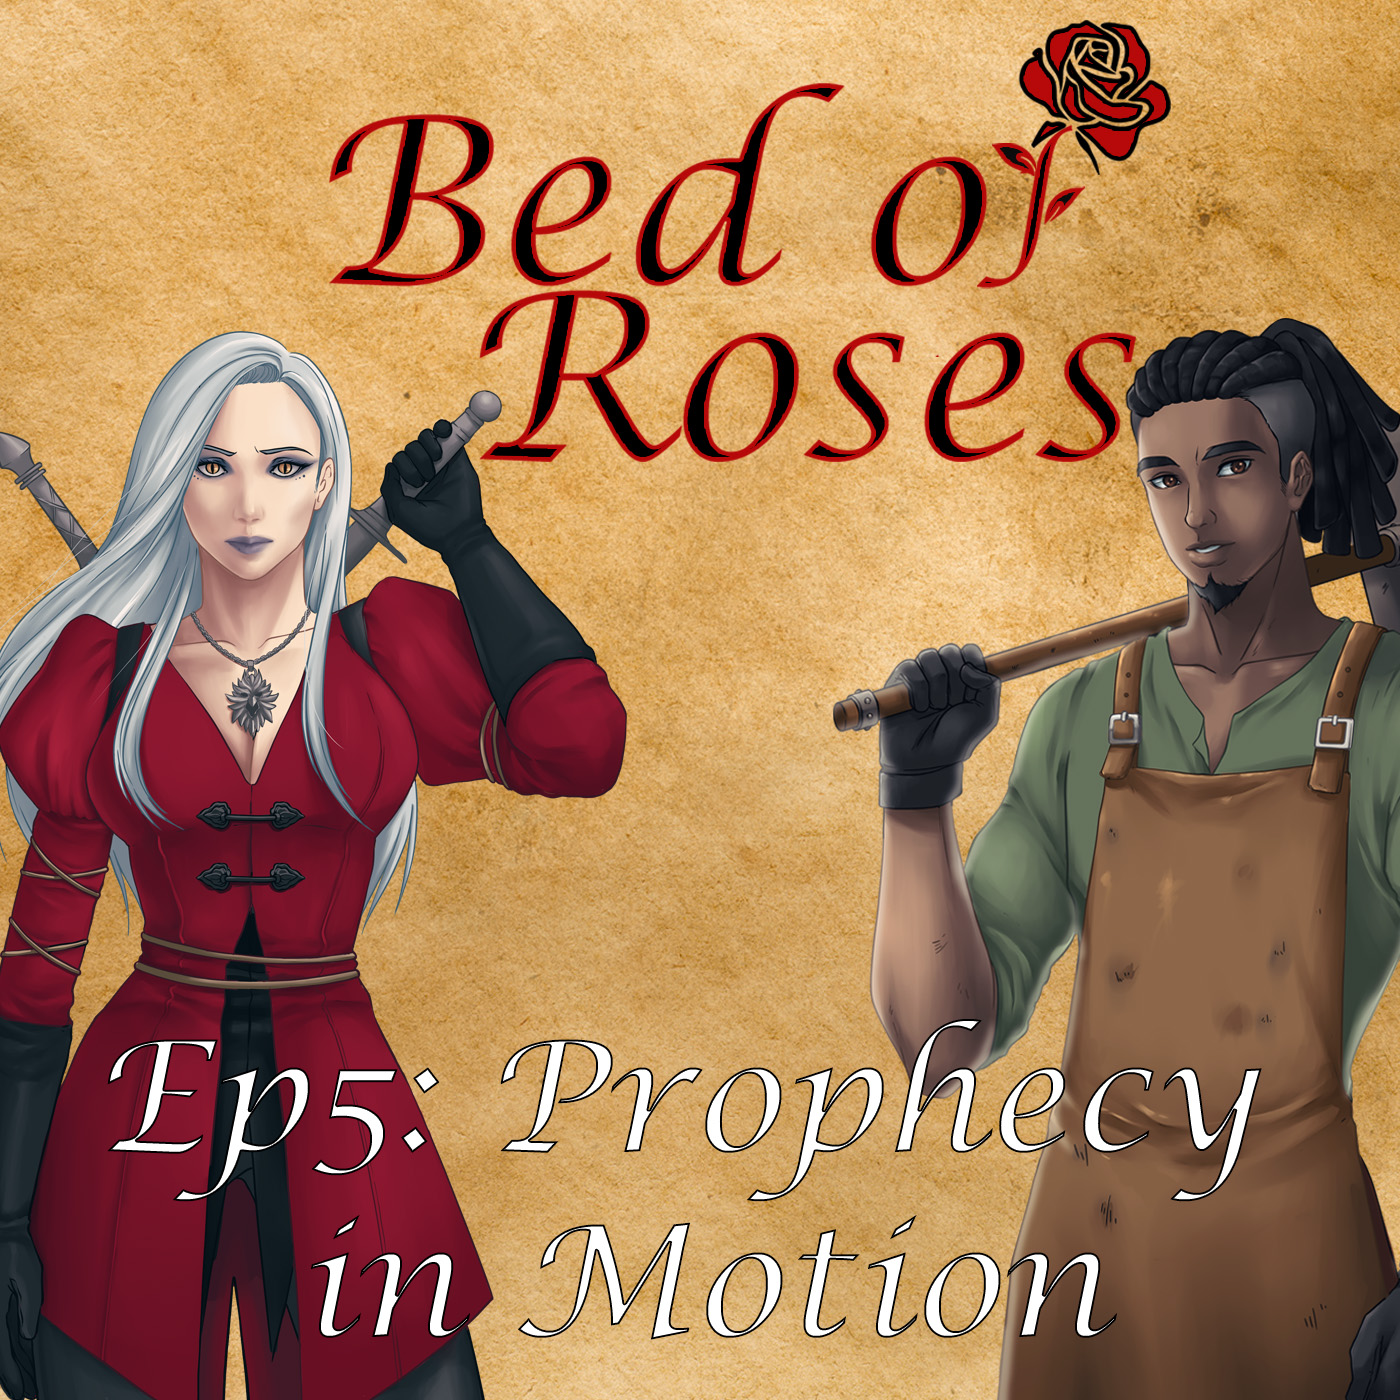 S1 Ep5: Prophecy in Motion